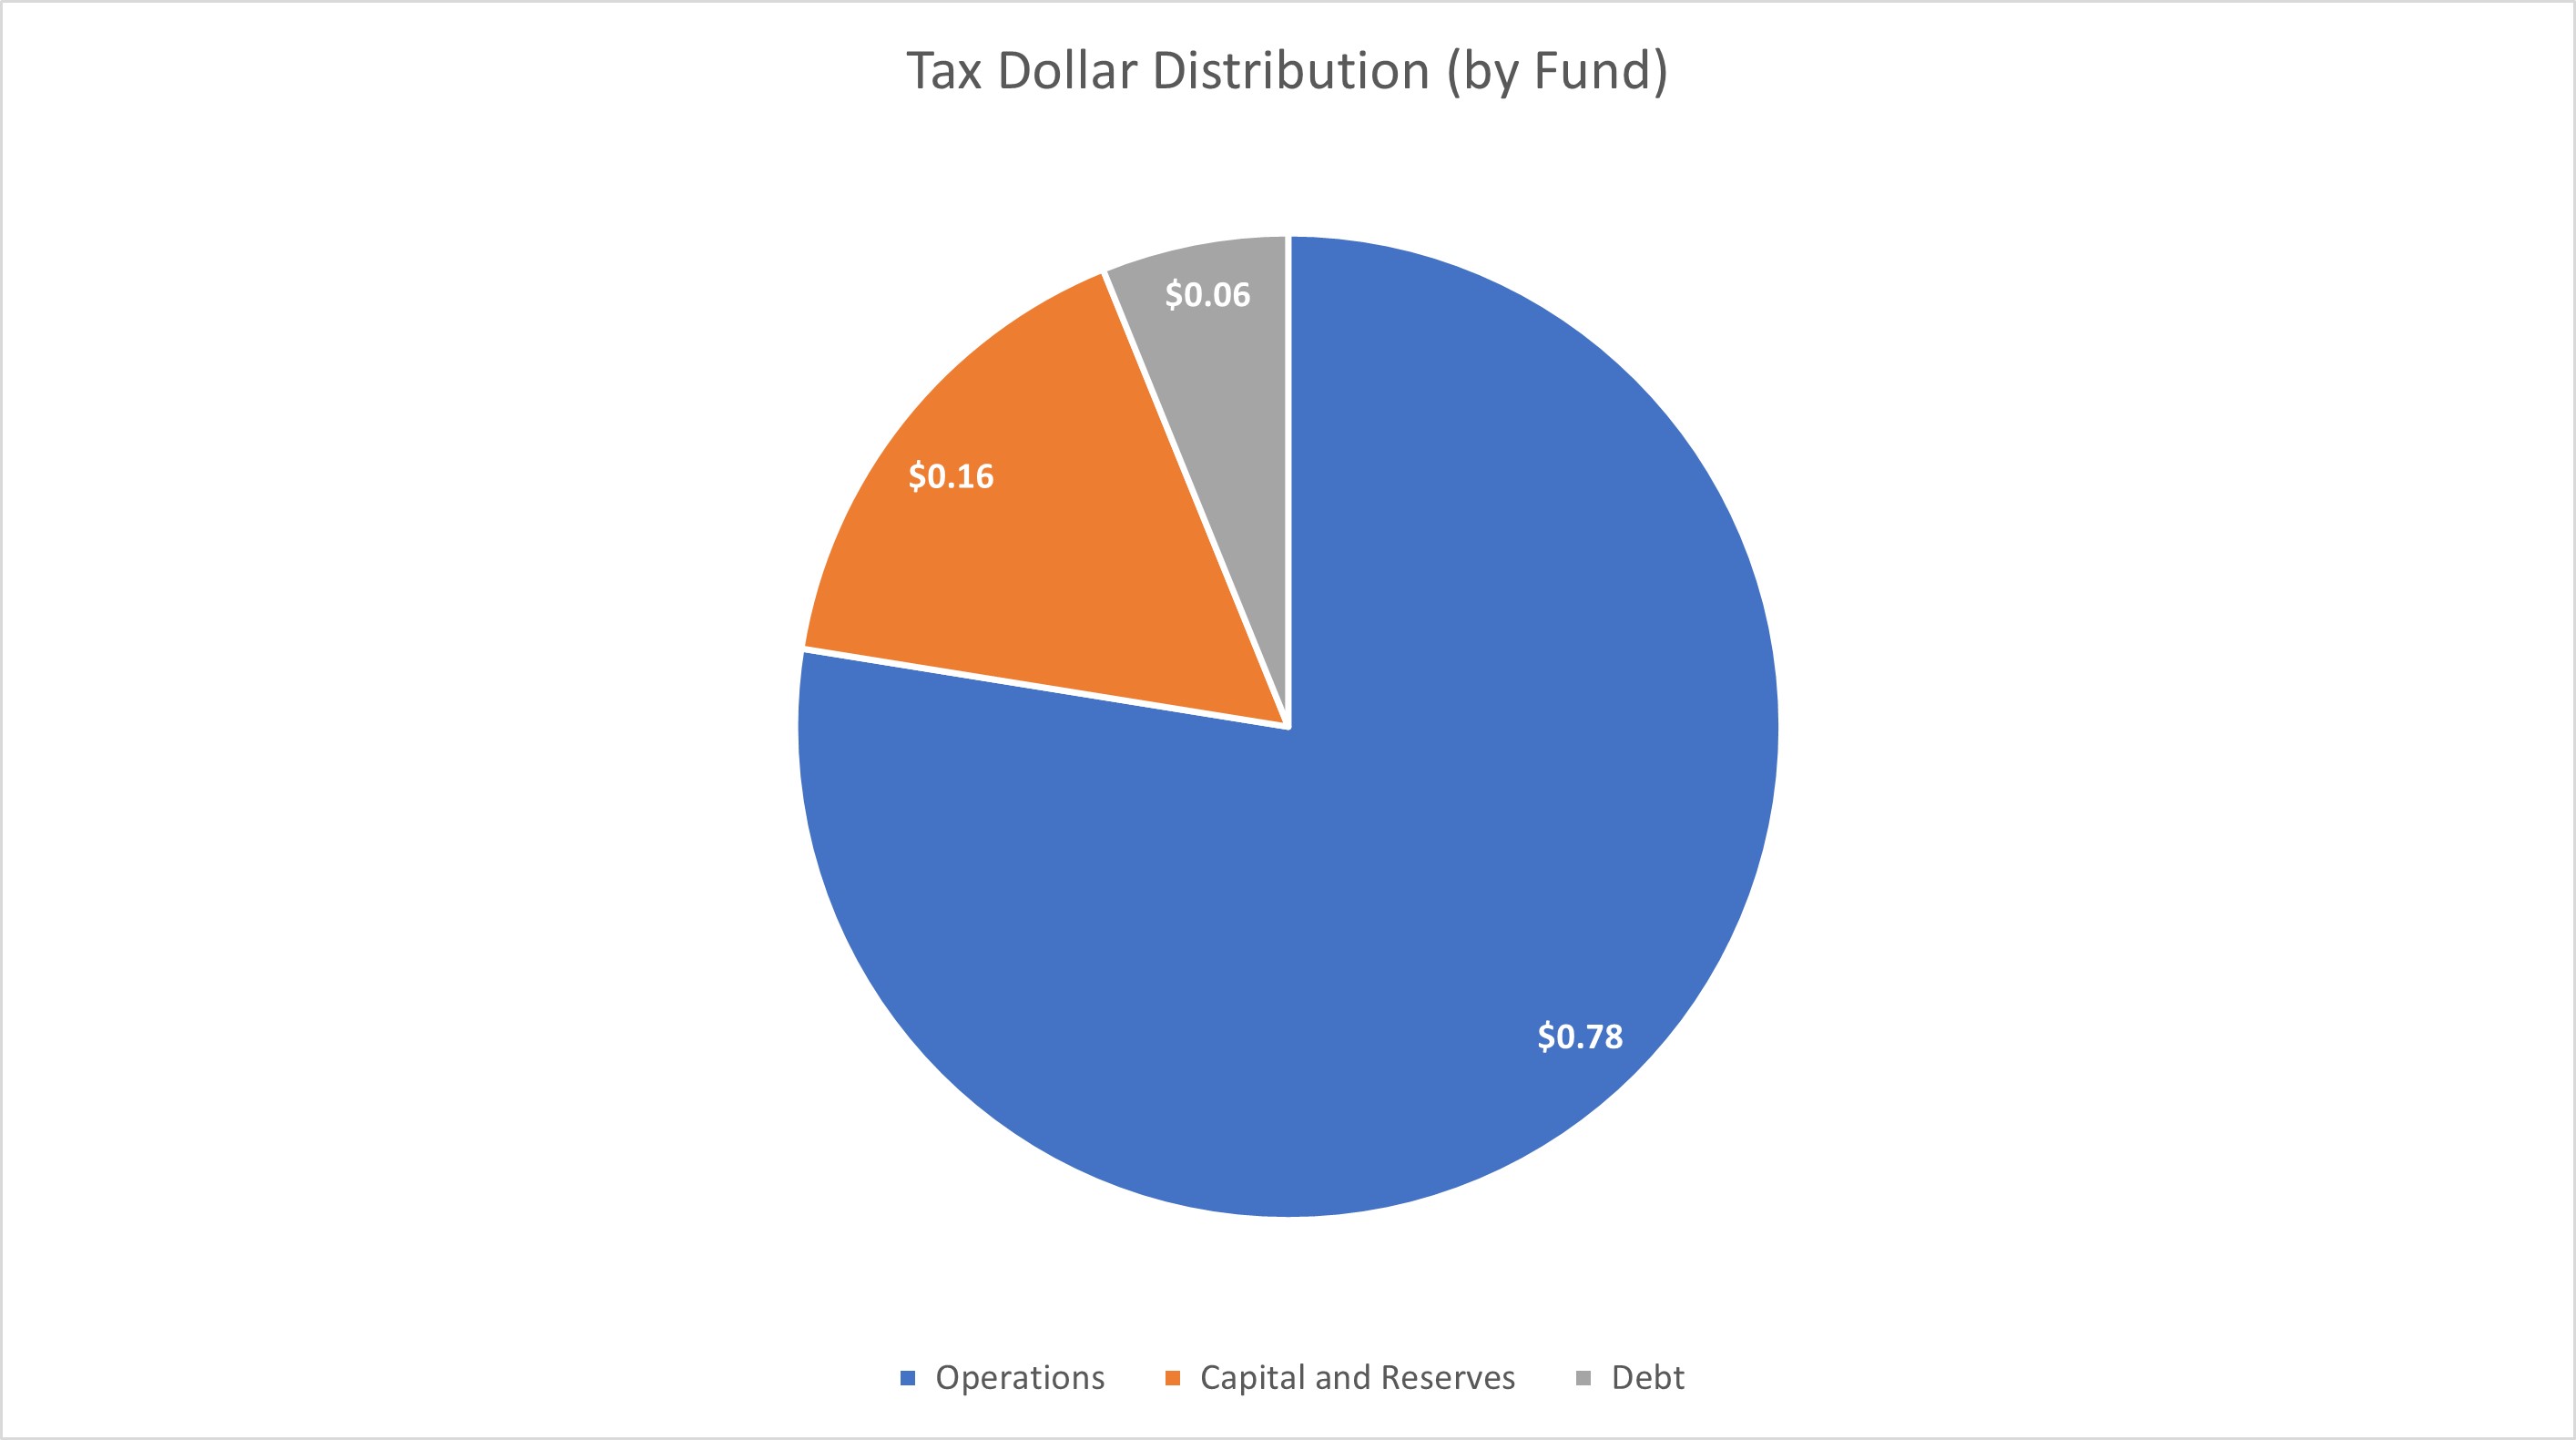 A graph depicting tax dollar distribution based on funds. According to the graph, from every tax dollar $0.78 goes to the operations budget, $0.16 to the Capital and Reserves budget, and $0.06 goes to debt repayment.